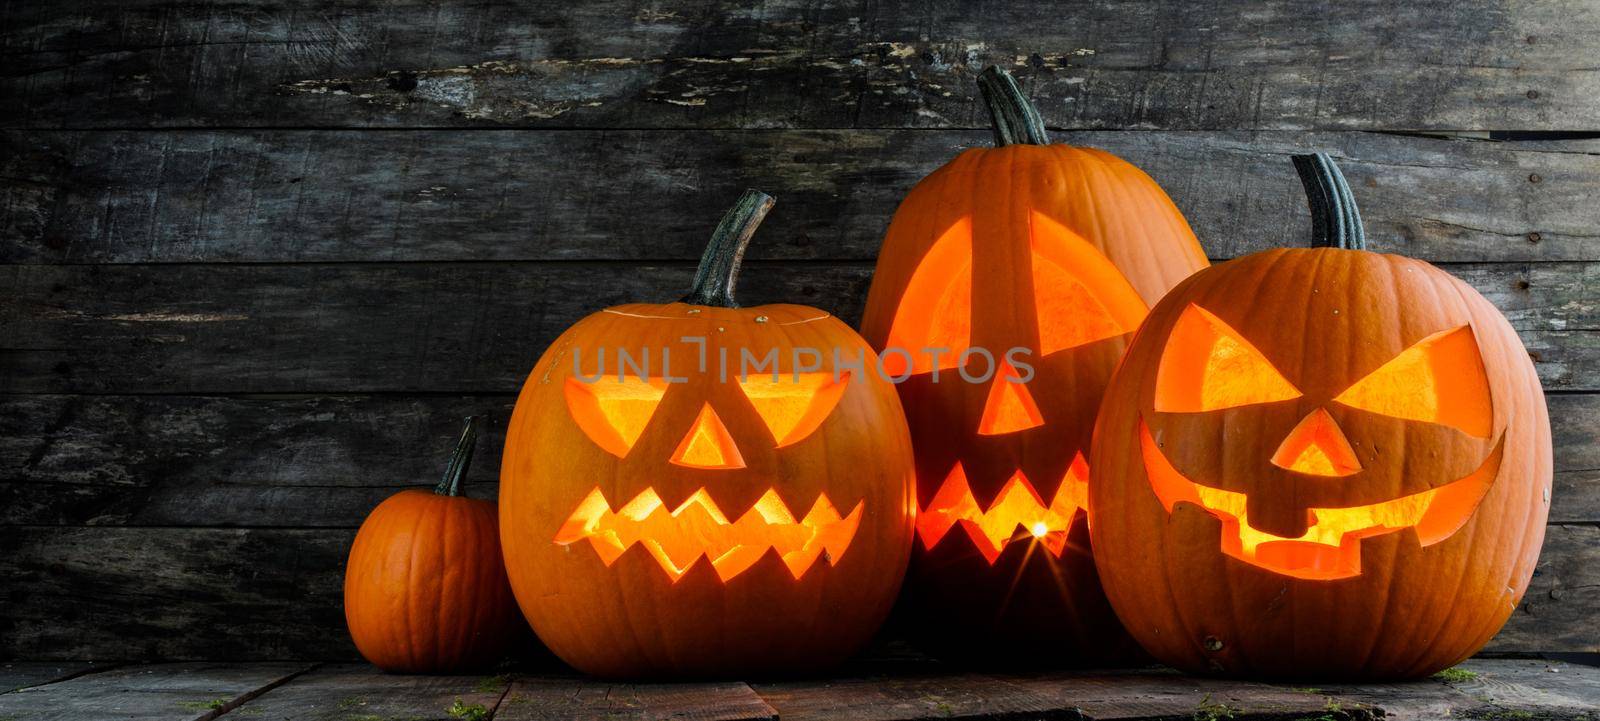 Group of Halloween pumpkins with candles inside on wooden background